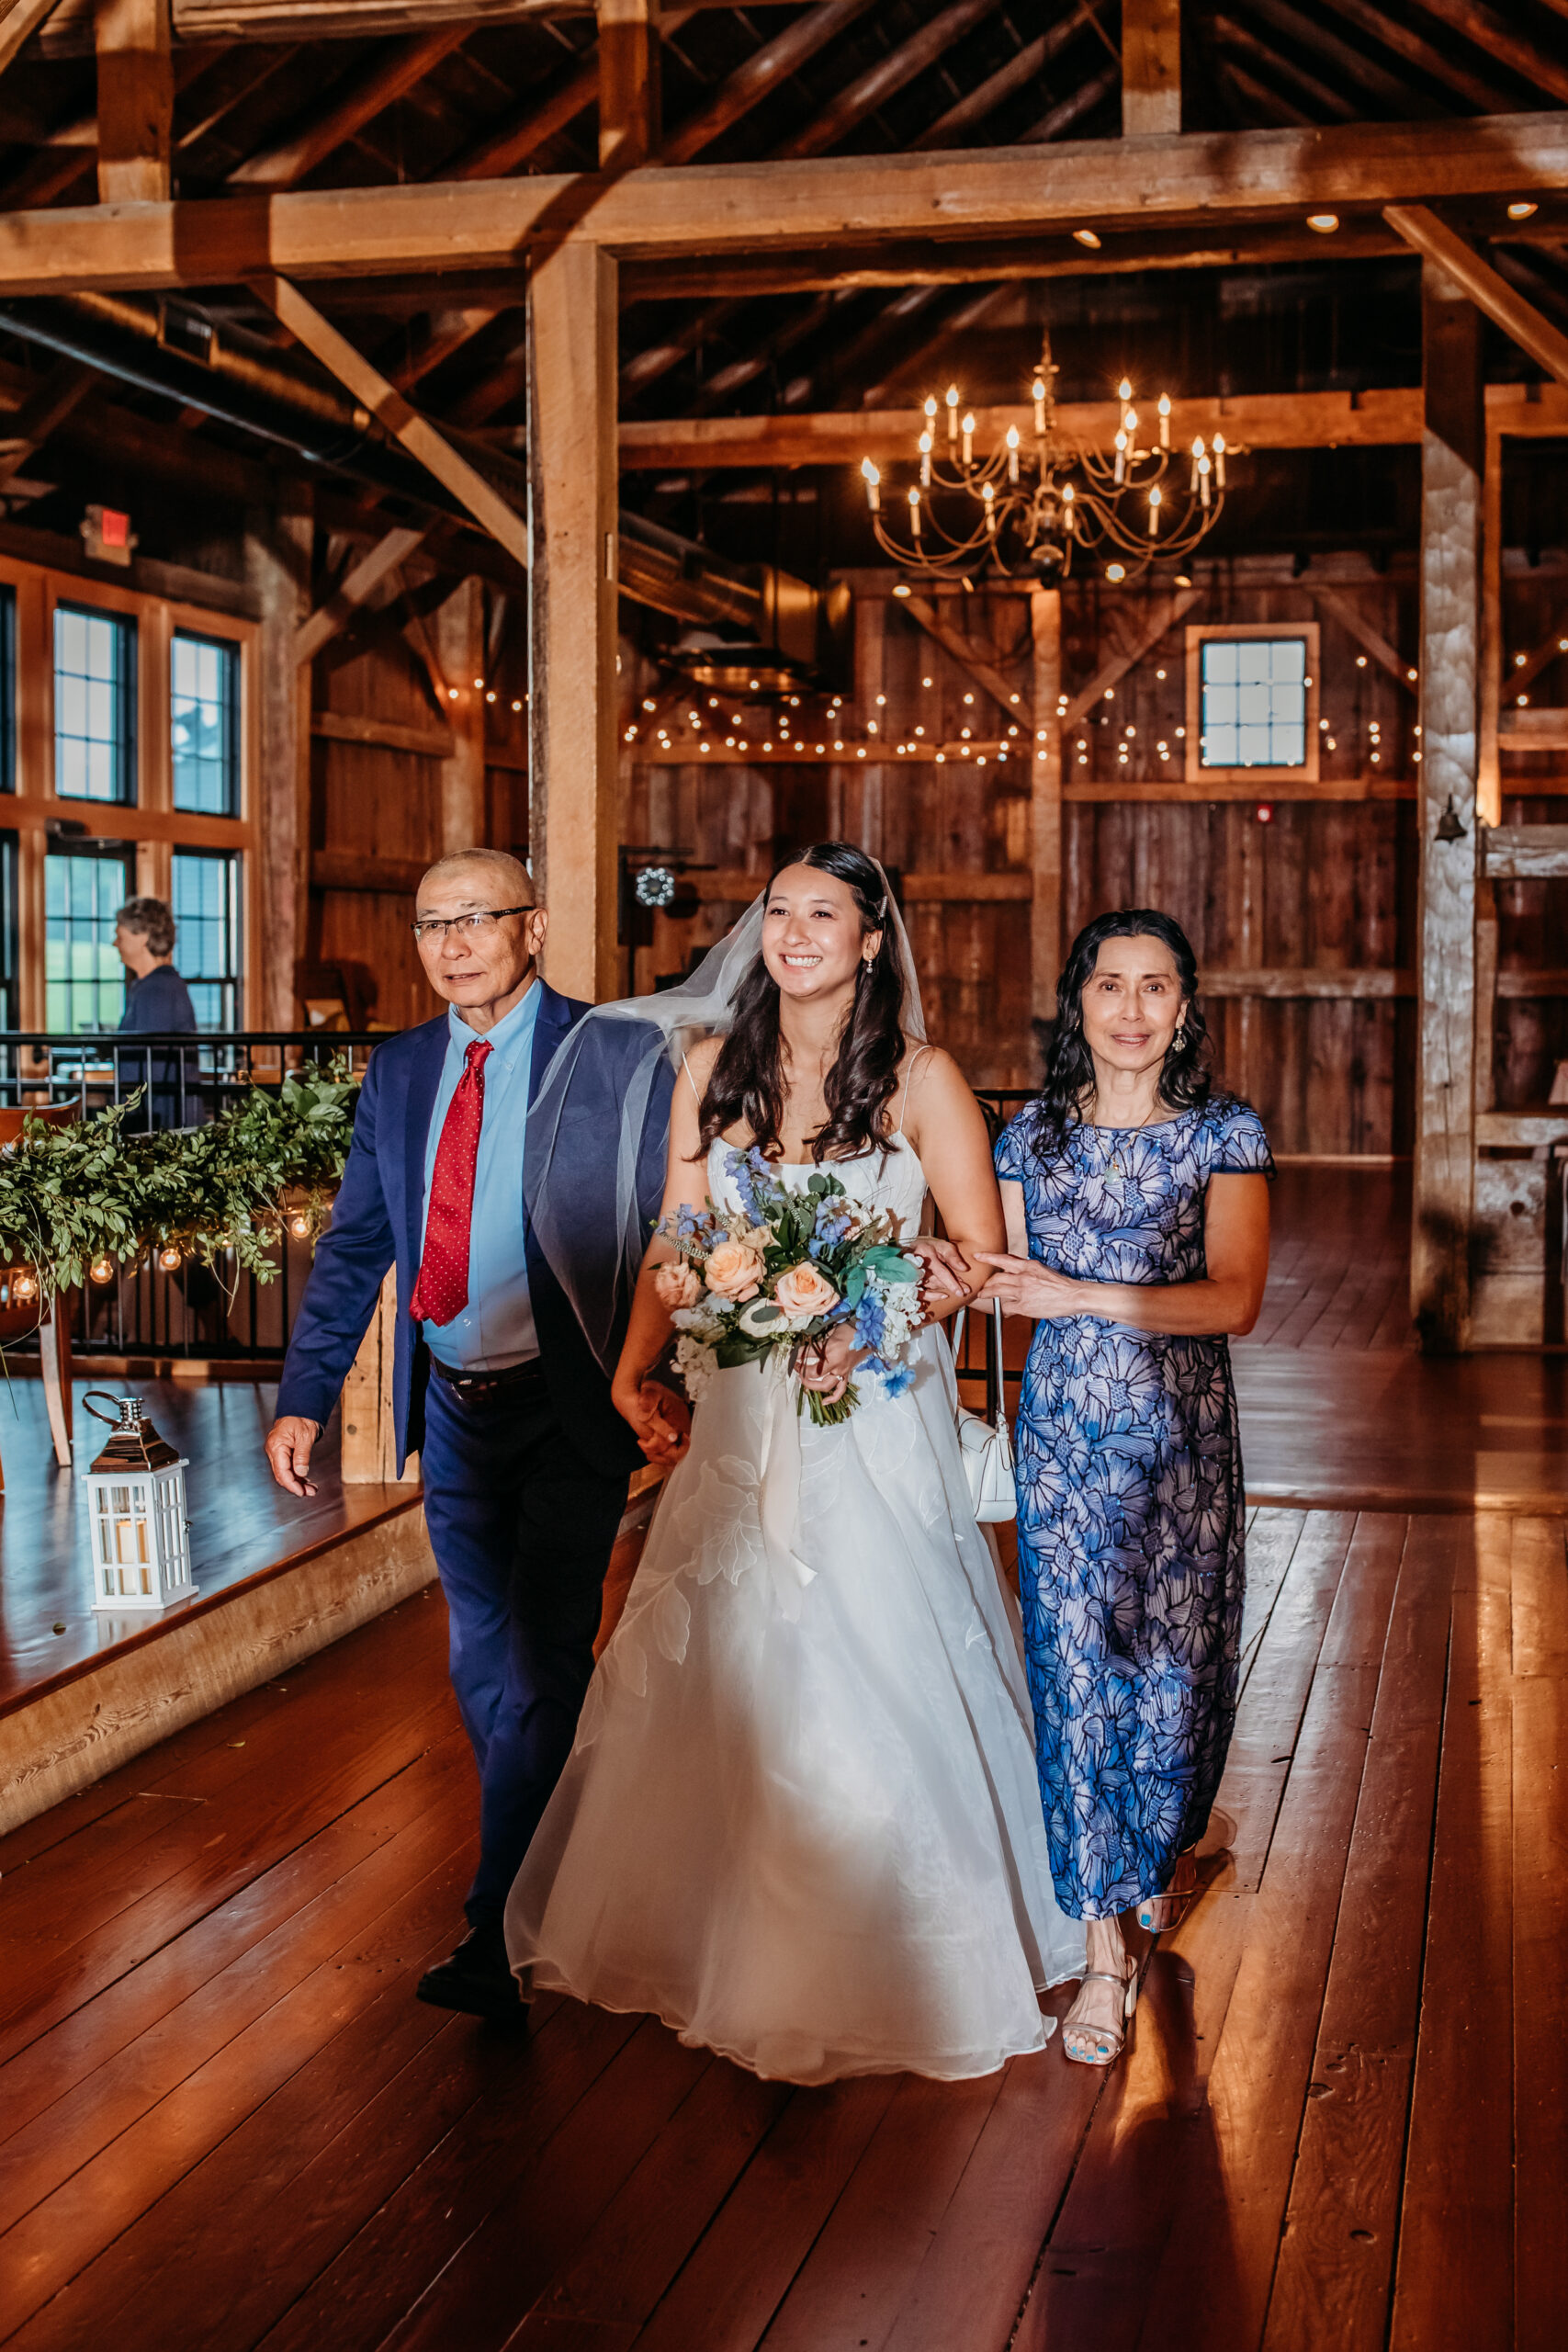 A bride being walked down the aisle of The Barn at Boyden Farm's rustic wedding barn by her two parents